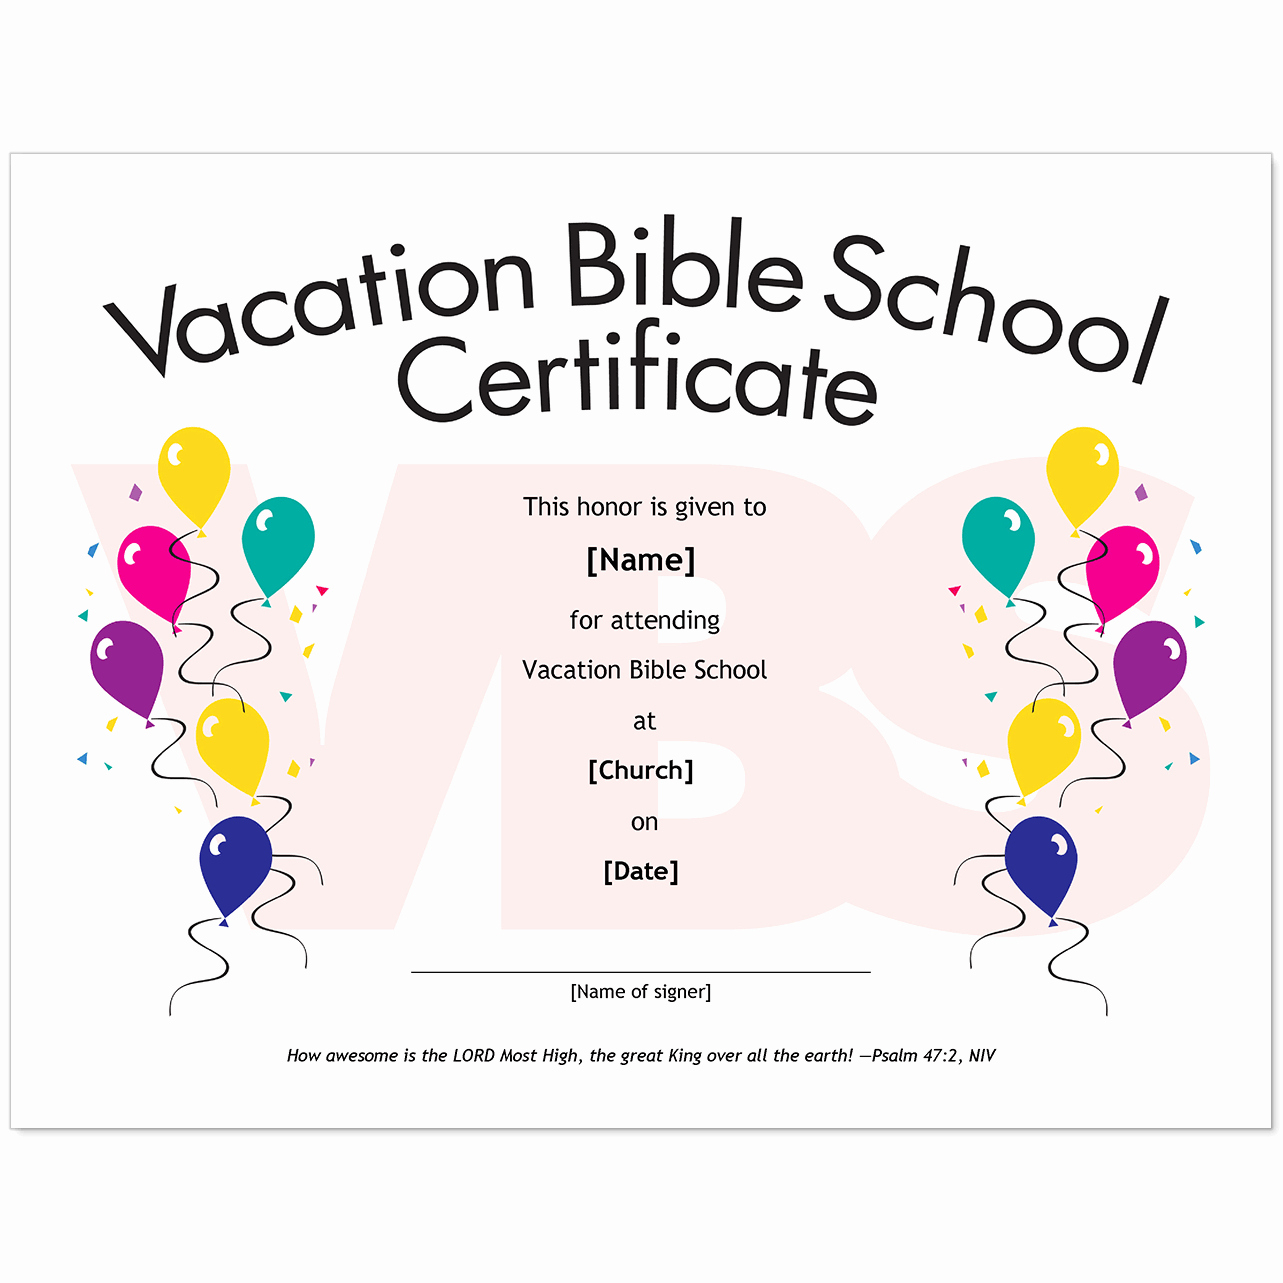 30 Vacation Bible School Certificate Templates | Pryncepality Pertaining To Vbs Certificate Template